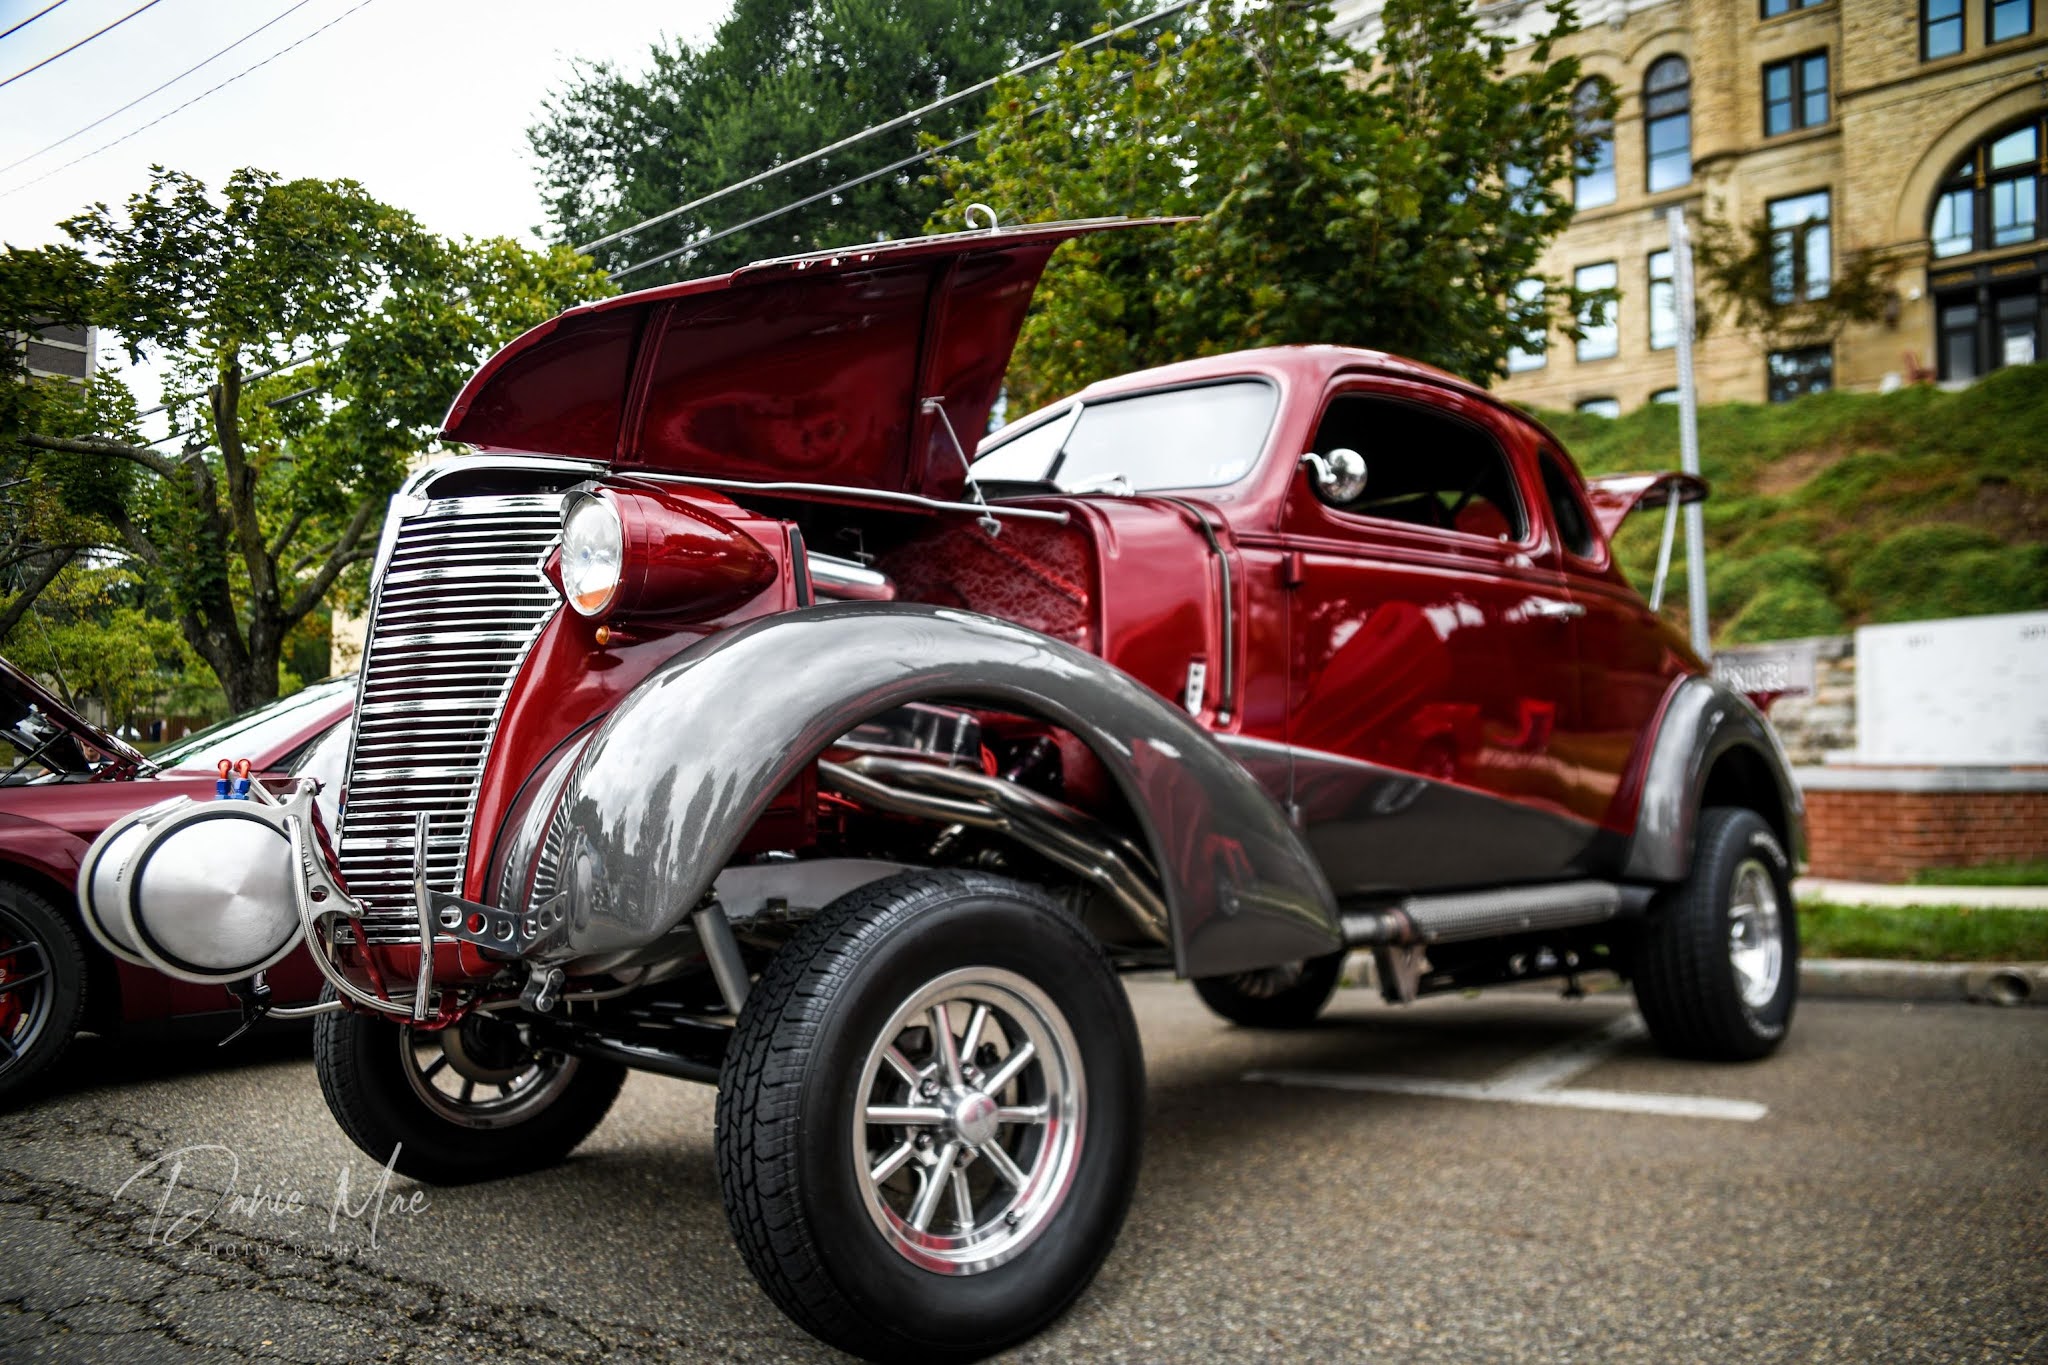 Hundreds Gather for Annual Pottsville Car Cruise